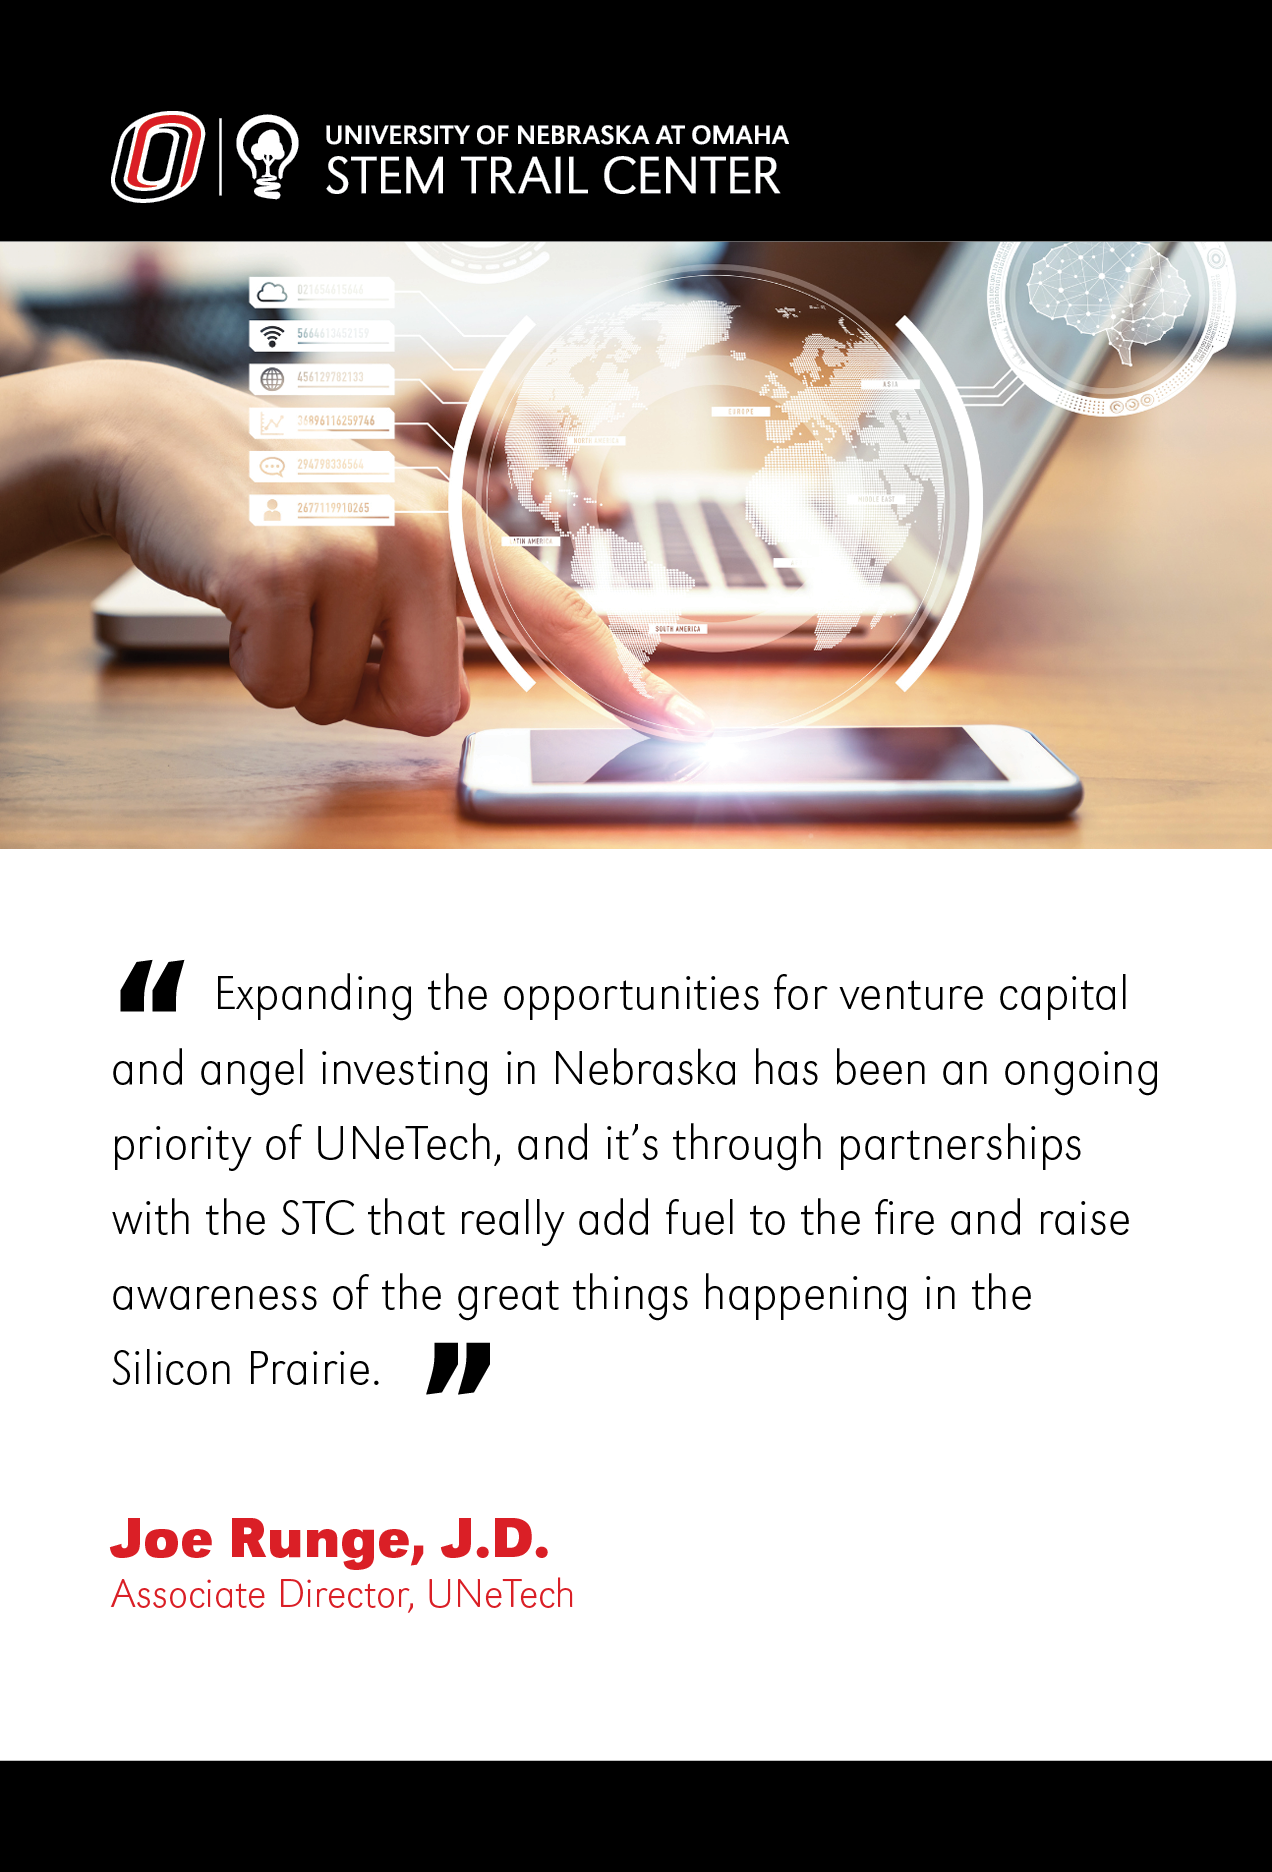 An image of a phone with a see through white globe above it. A quote from Joe Runge